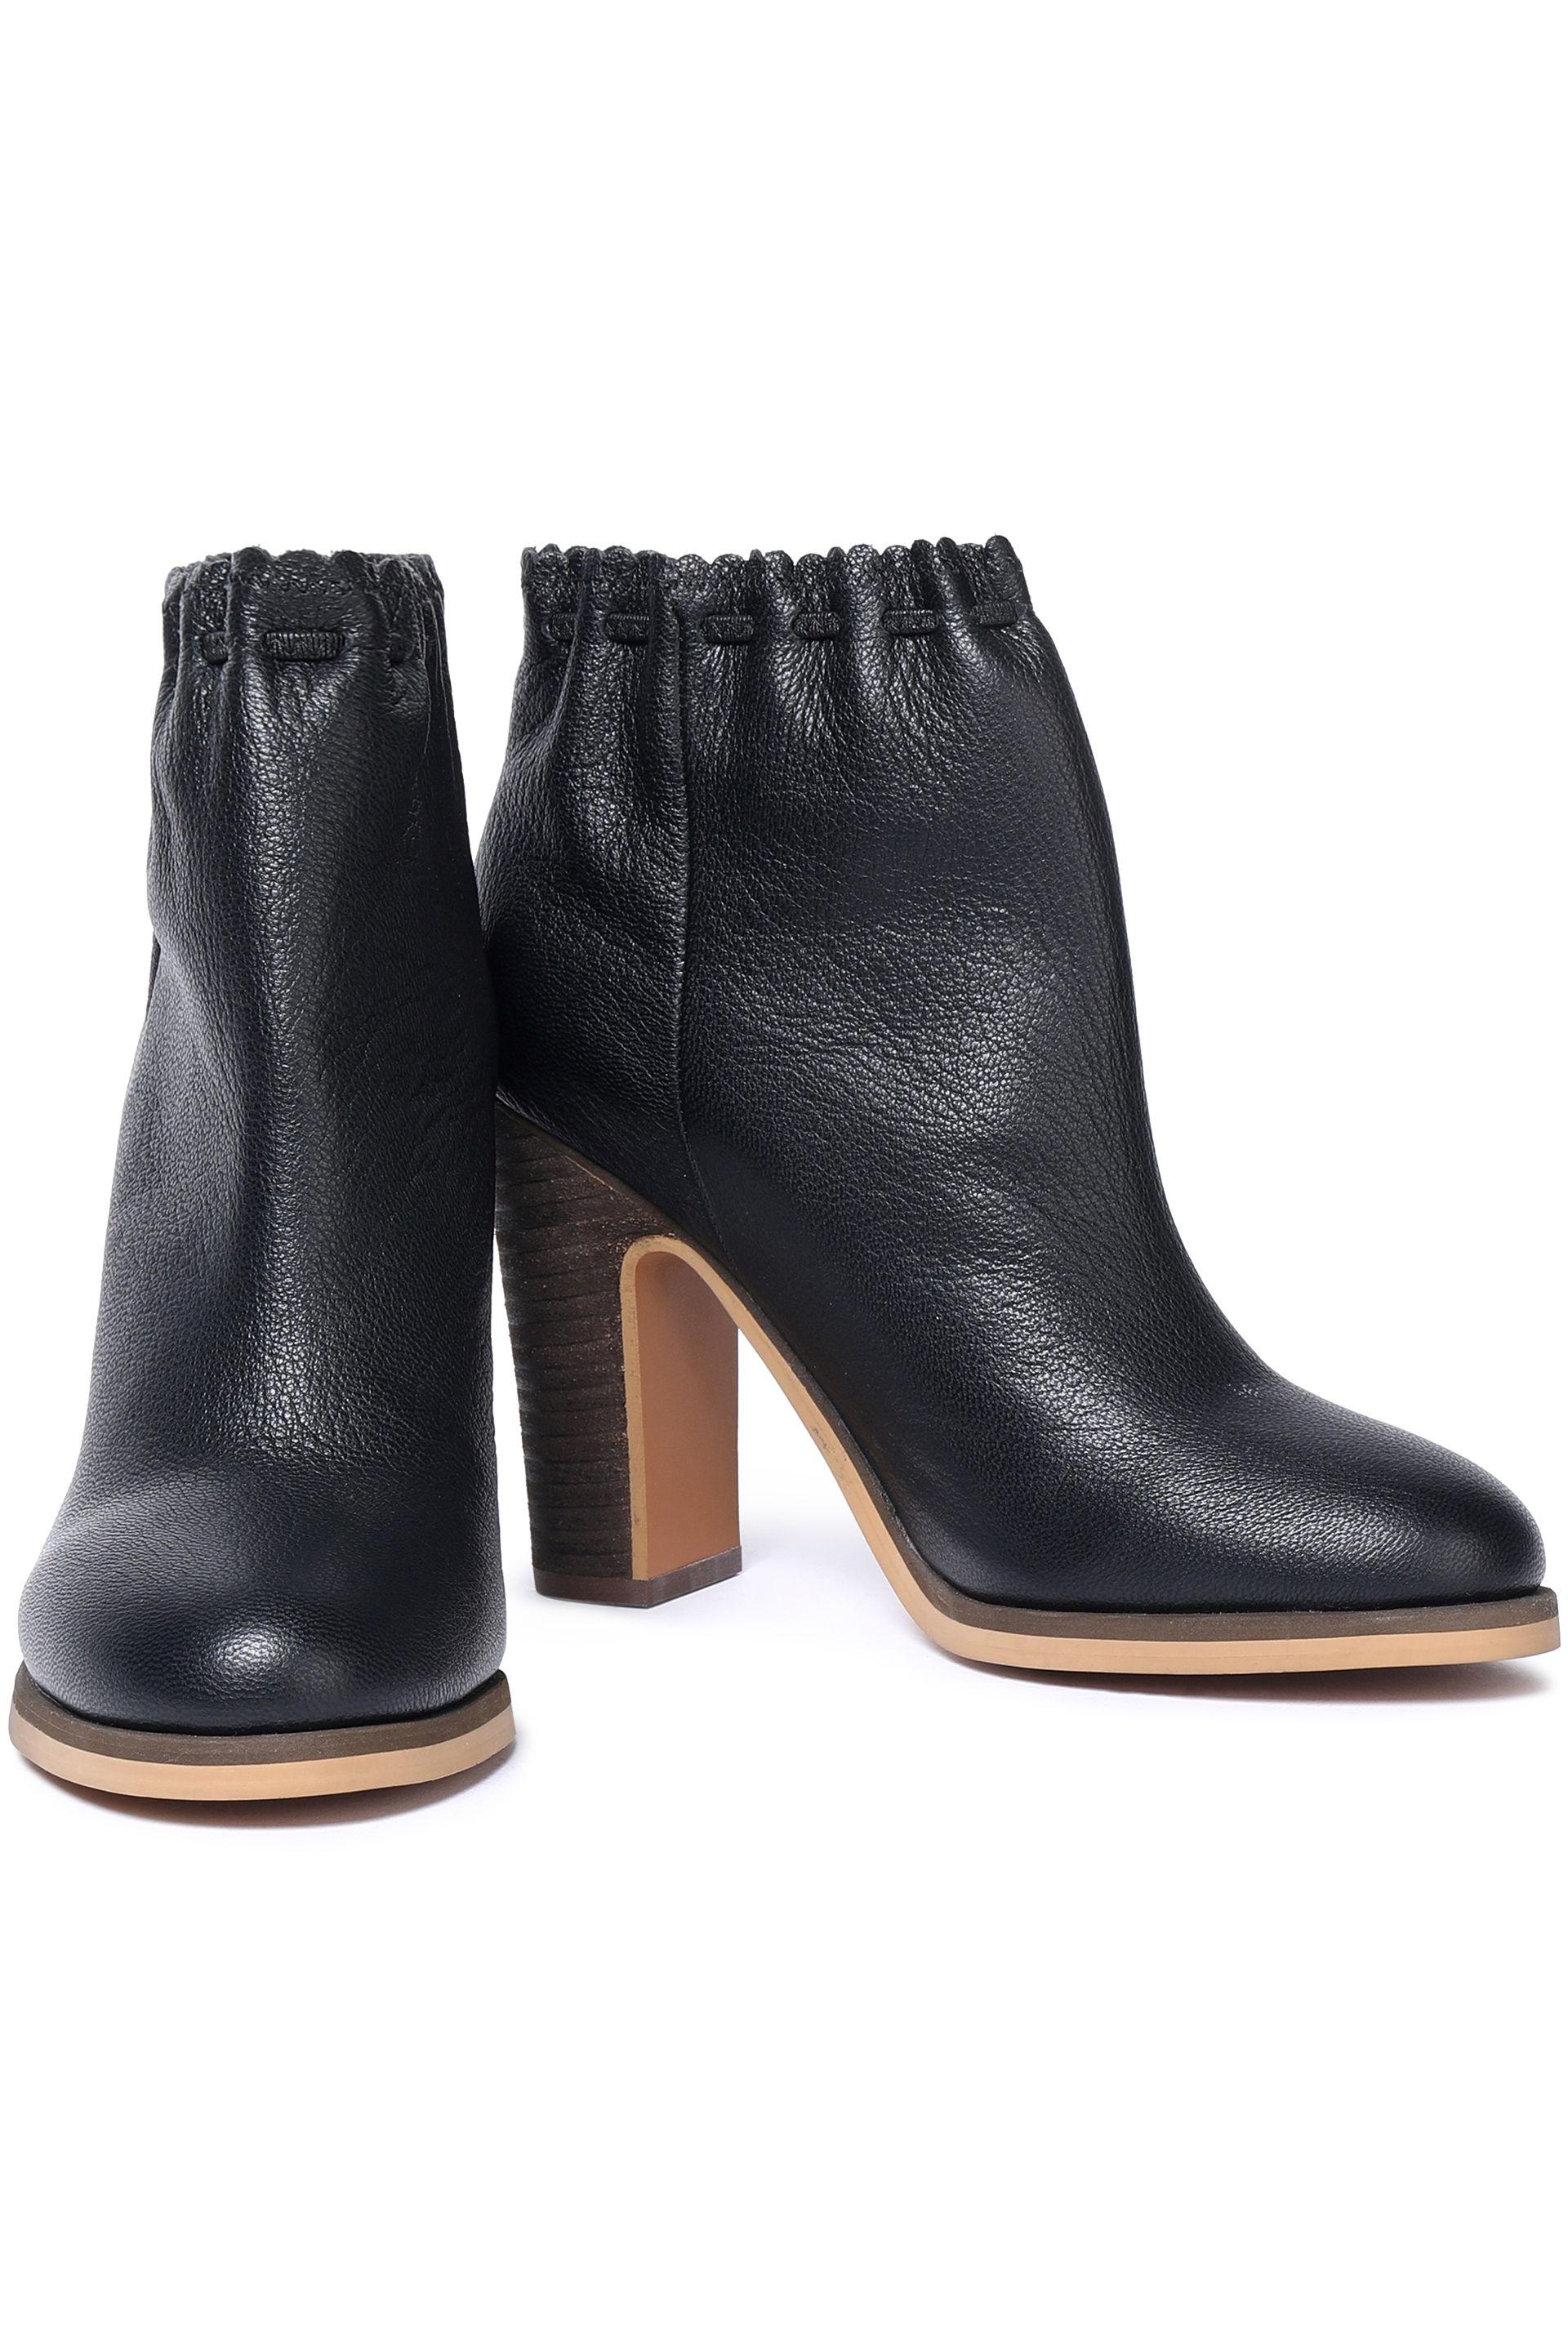 Jane Textured-leather Ankle Boots Black 